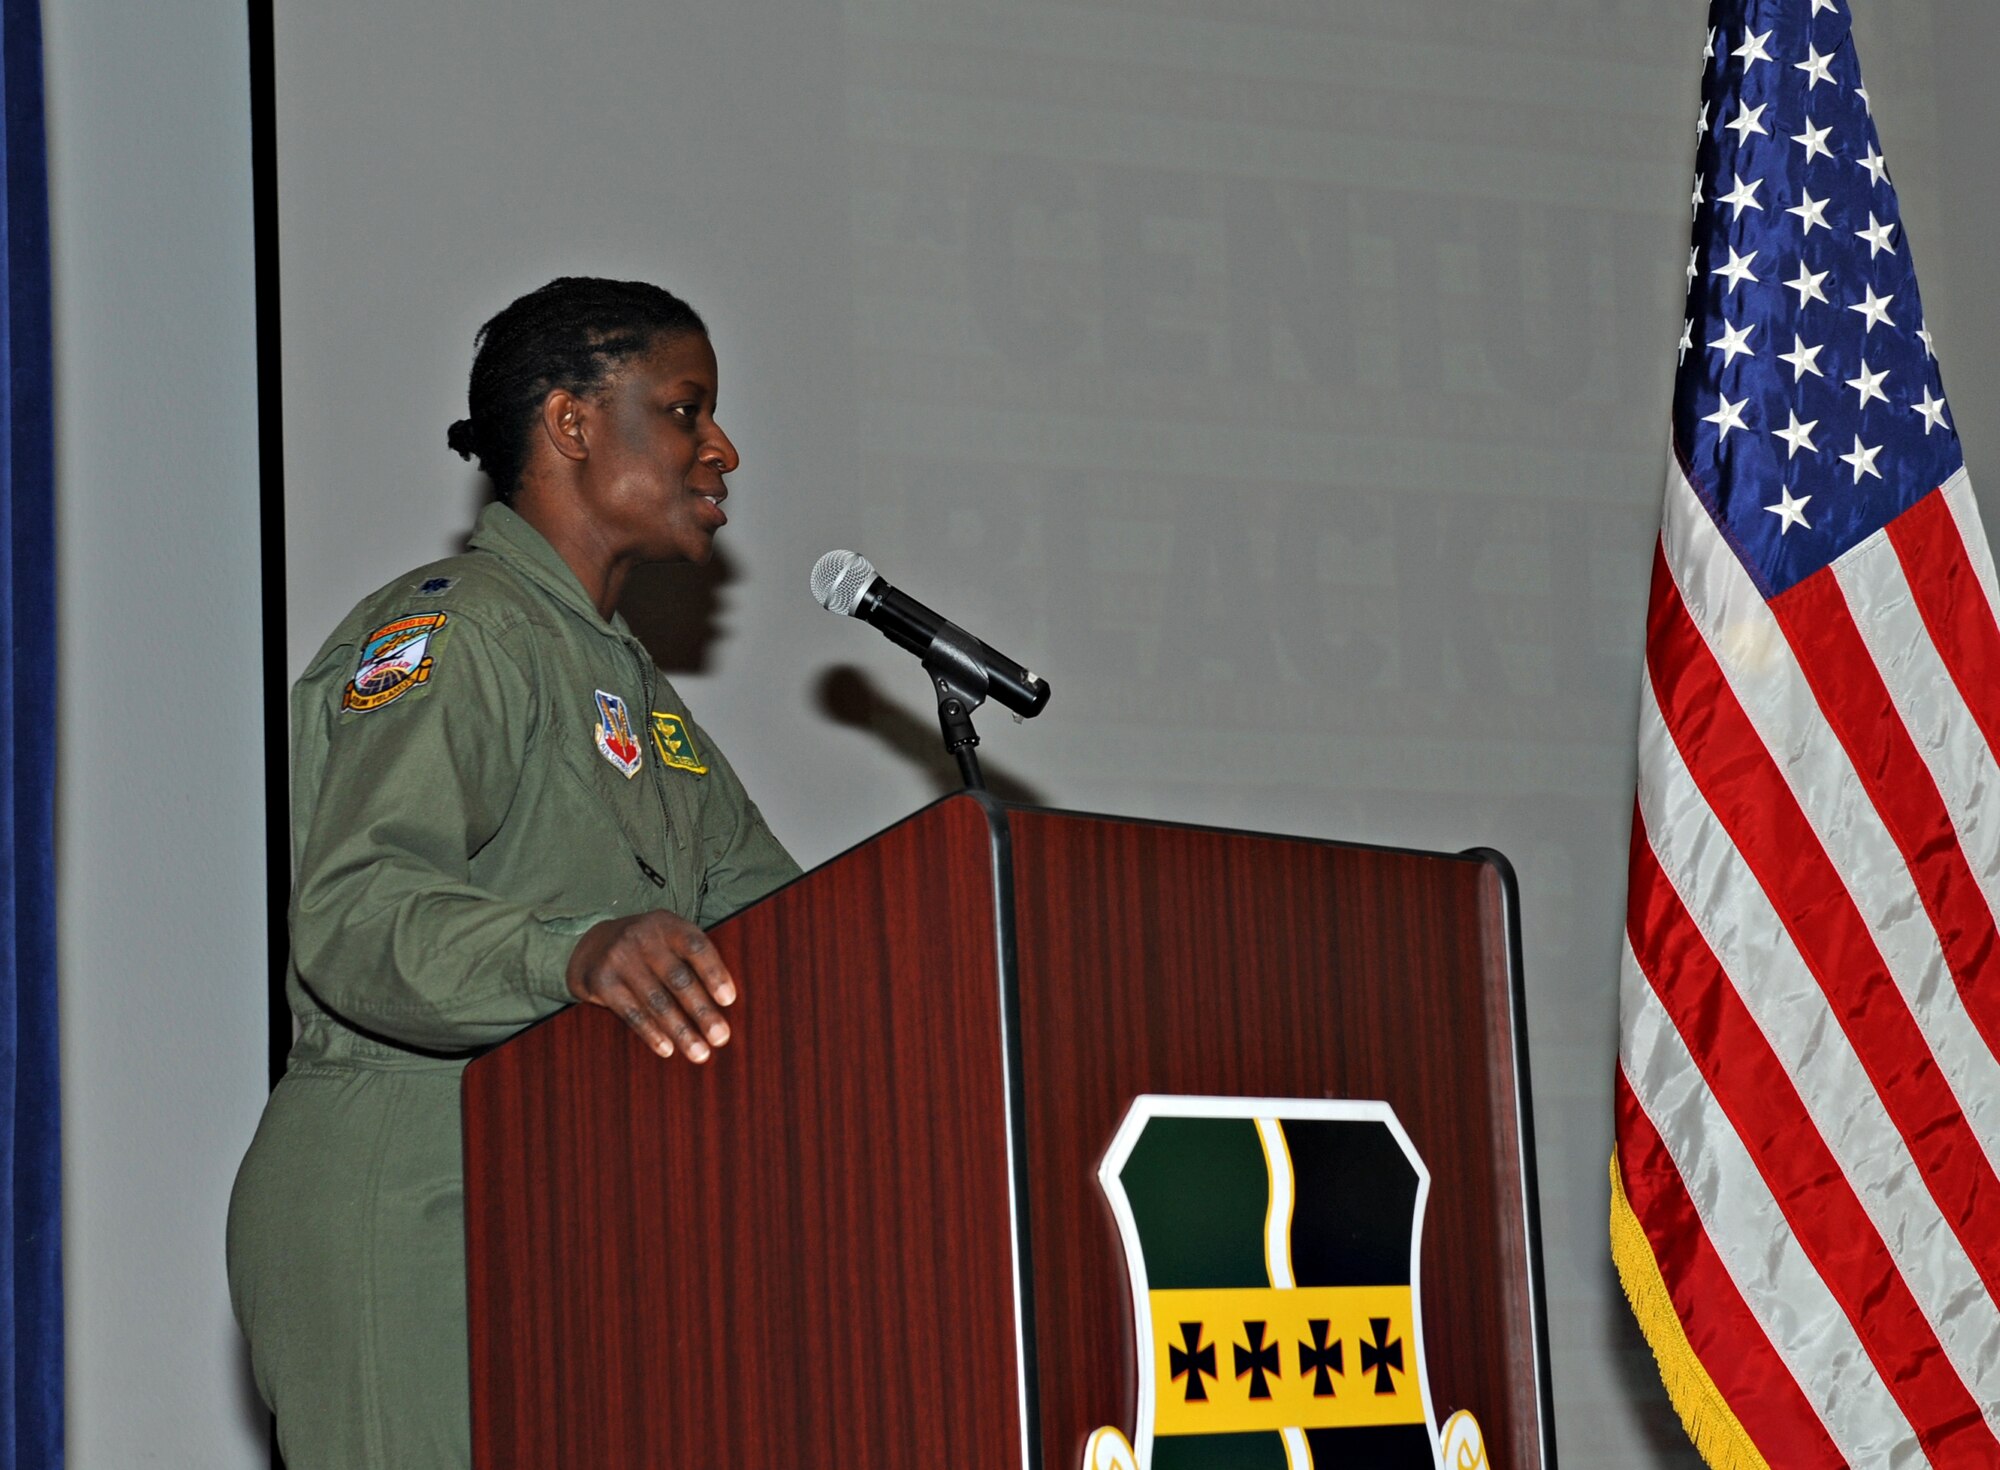 Lt. Col. Merryl Tengesdal, a U-2 Dragon Lady pilot and 9th Reconnaissance Wing inspector general, speaks about her endeavors and the accomplishments of African Americans in U.S. history during the Black History Month Luncheon Feb. 24, 2015, at Beale Air Force Base, Calif. The event was held to recognize the achievements made by African Americans in U.S. history. (U.S. Air Force photo by Airman 1st Class Ramon A. Adelan/Released)